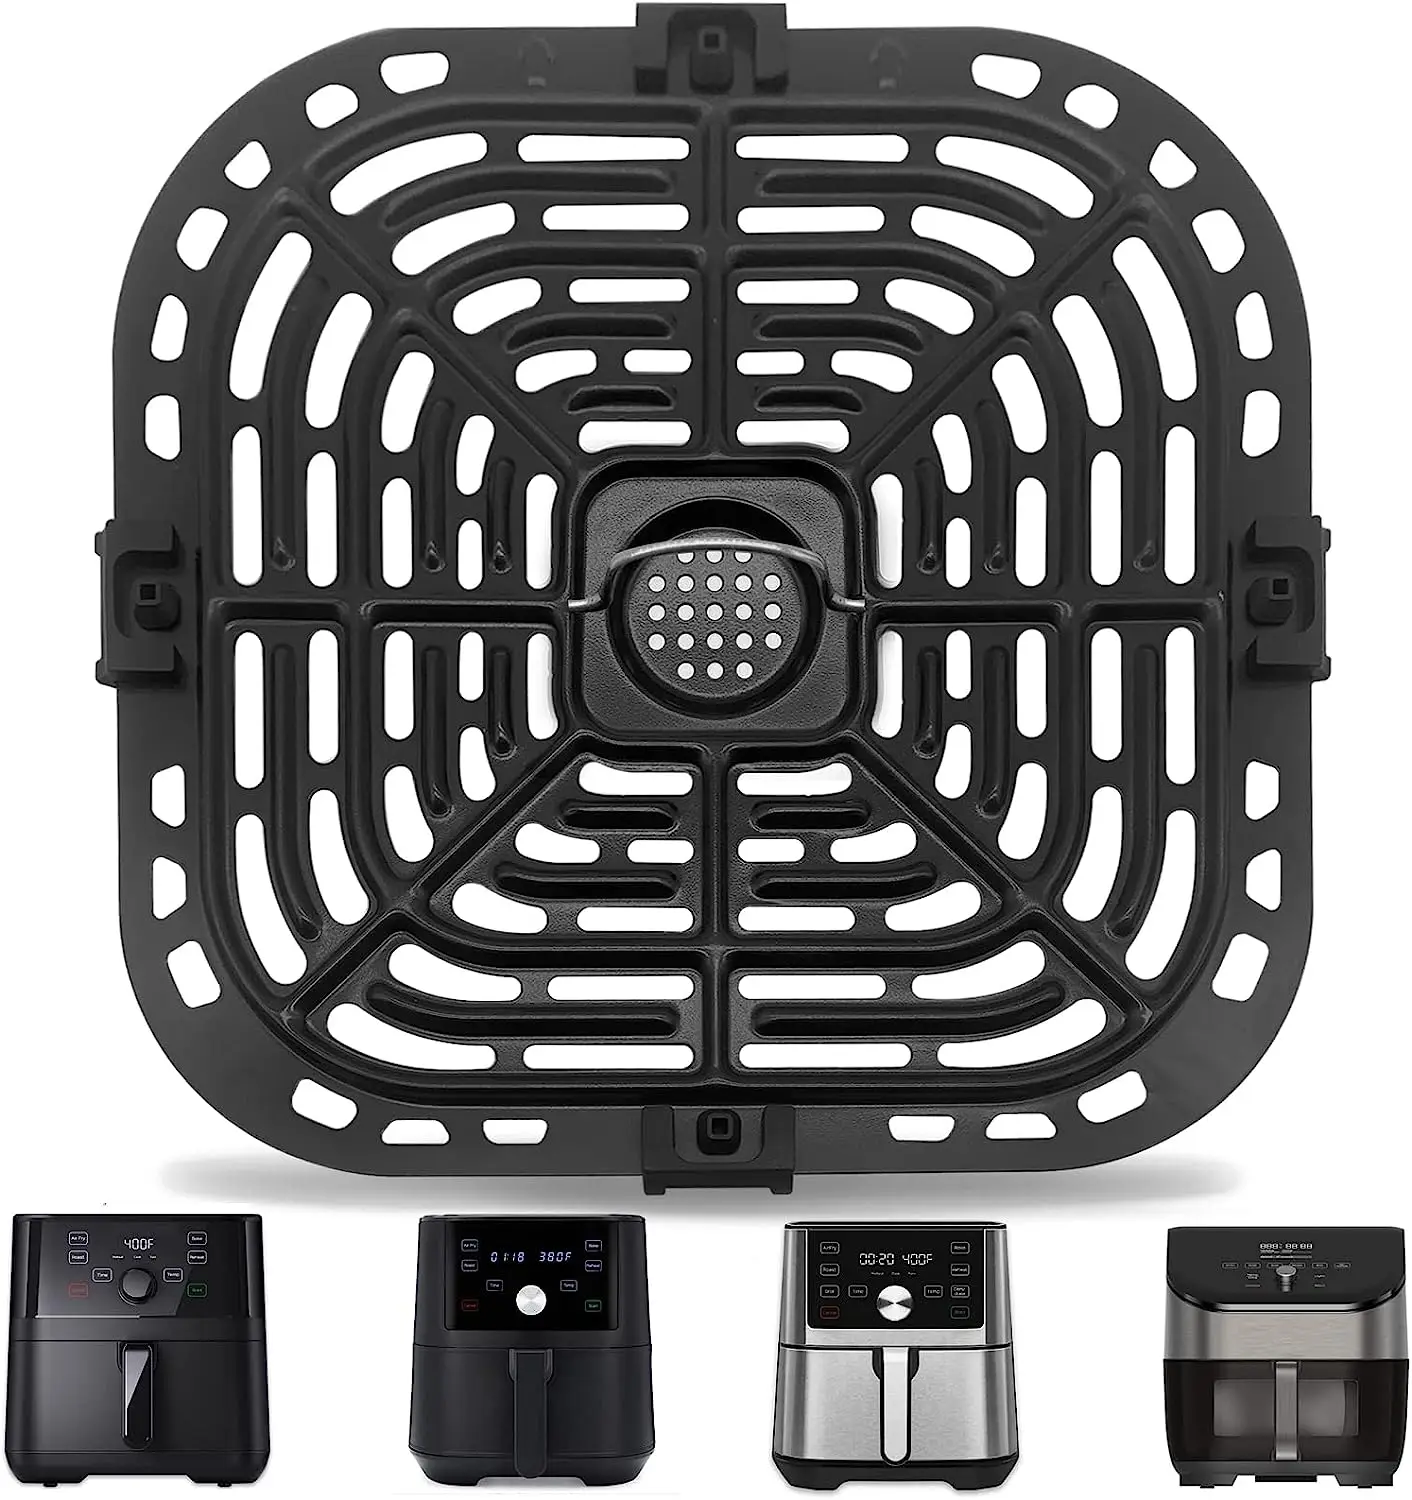 Cooking Tray for Instant Vortex Plus 10 Quart Air Fryer,3 Pcs Replacement Cooking Trays for Innsky 10.6 Quart Air Fryer Oven,Nonstic Cooking Rack